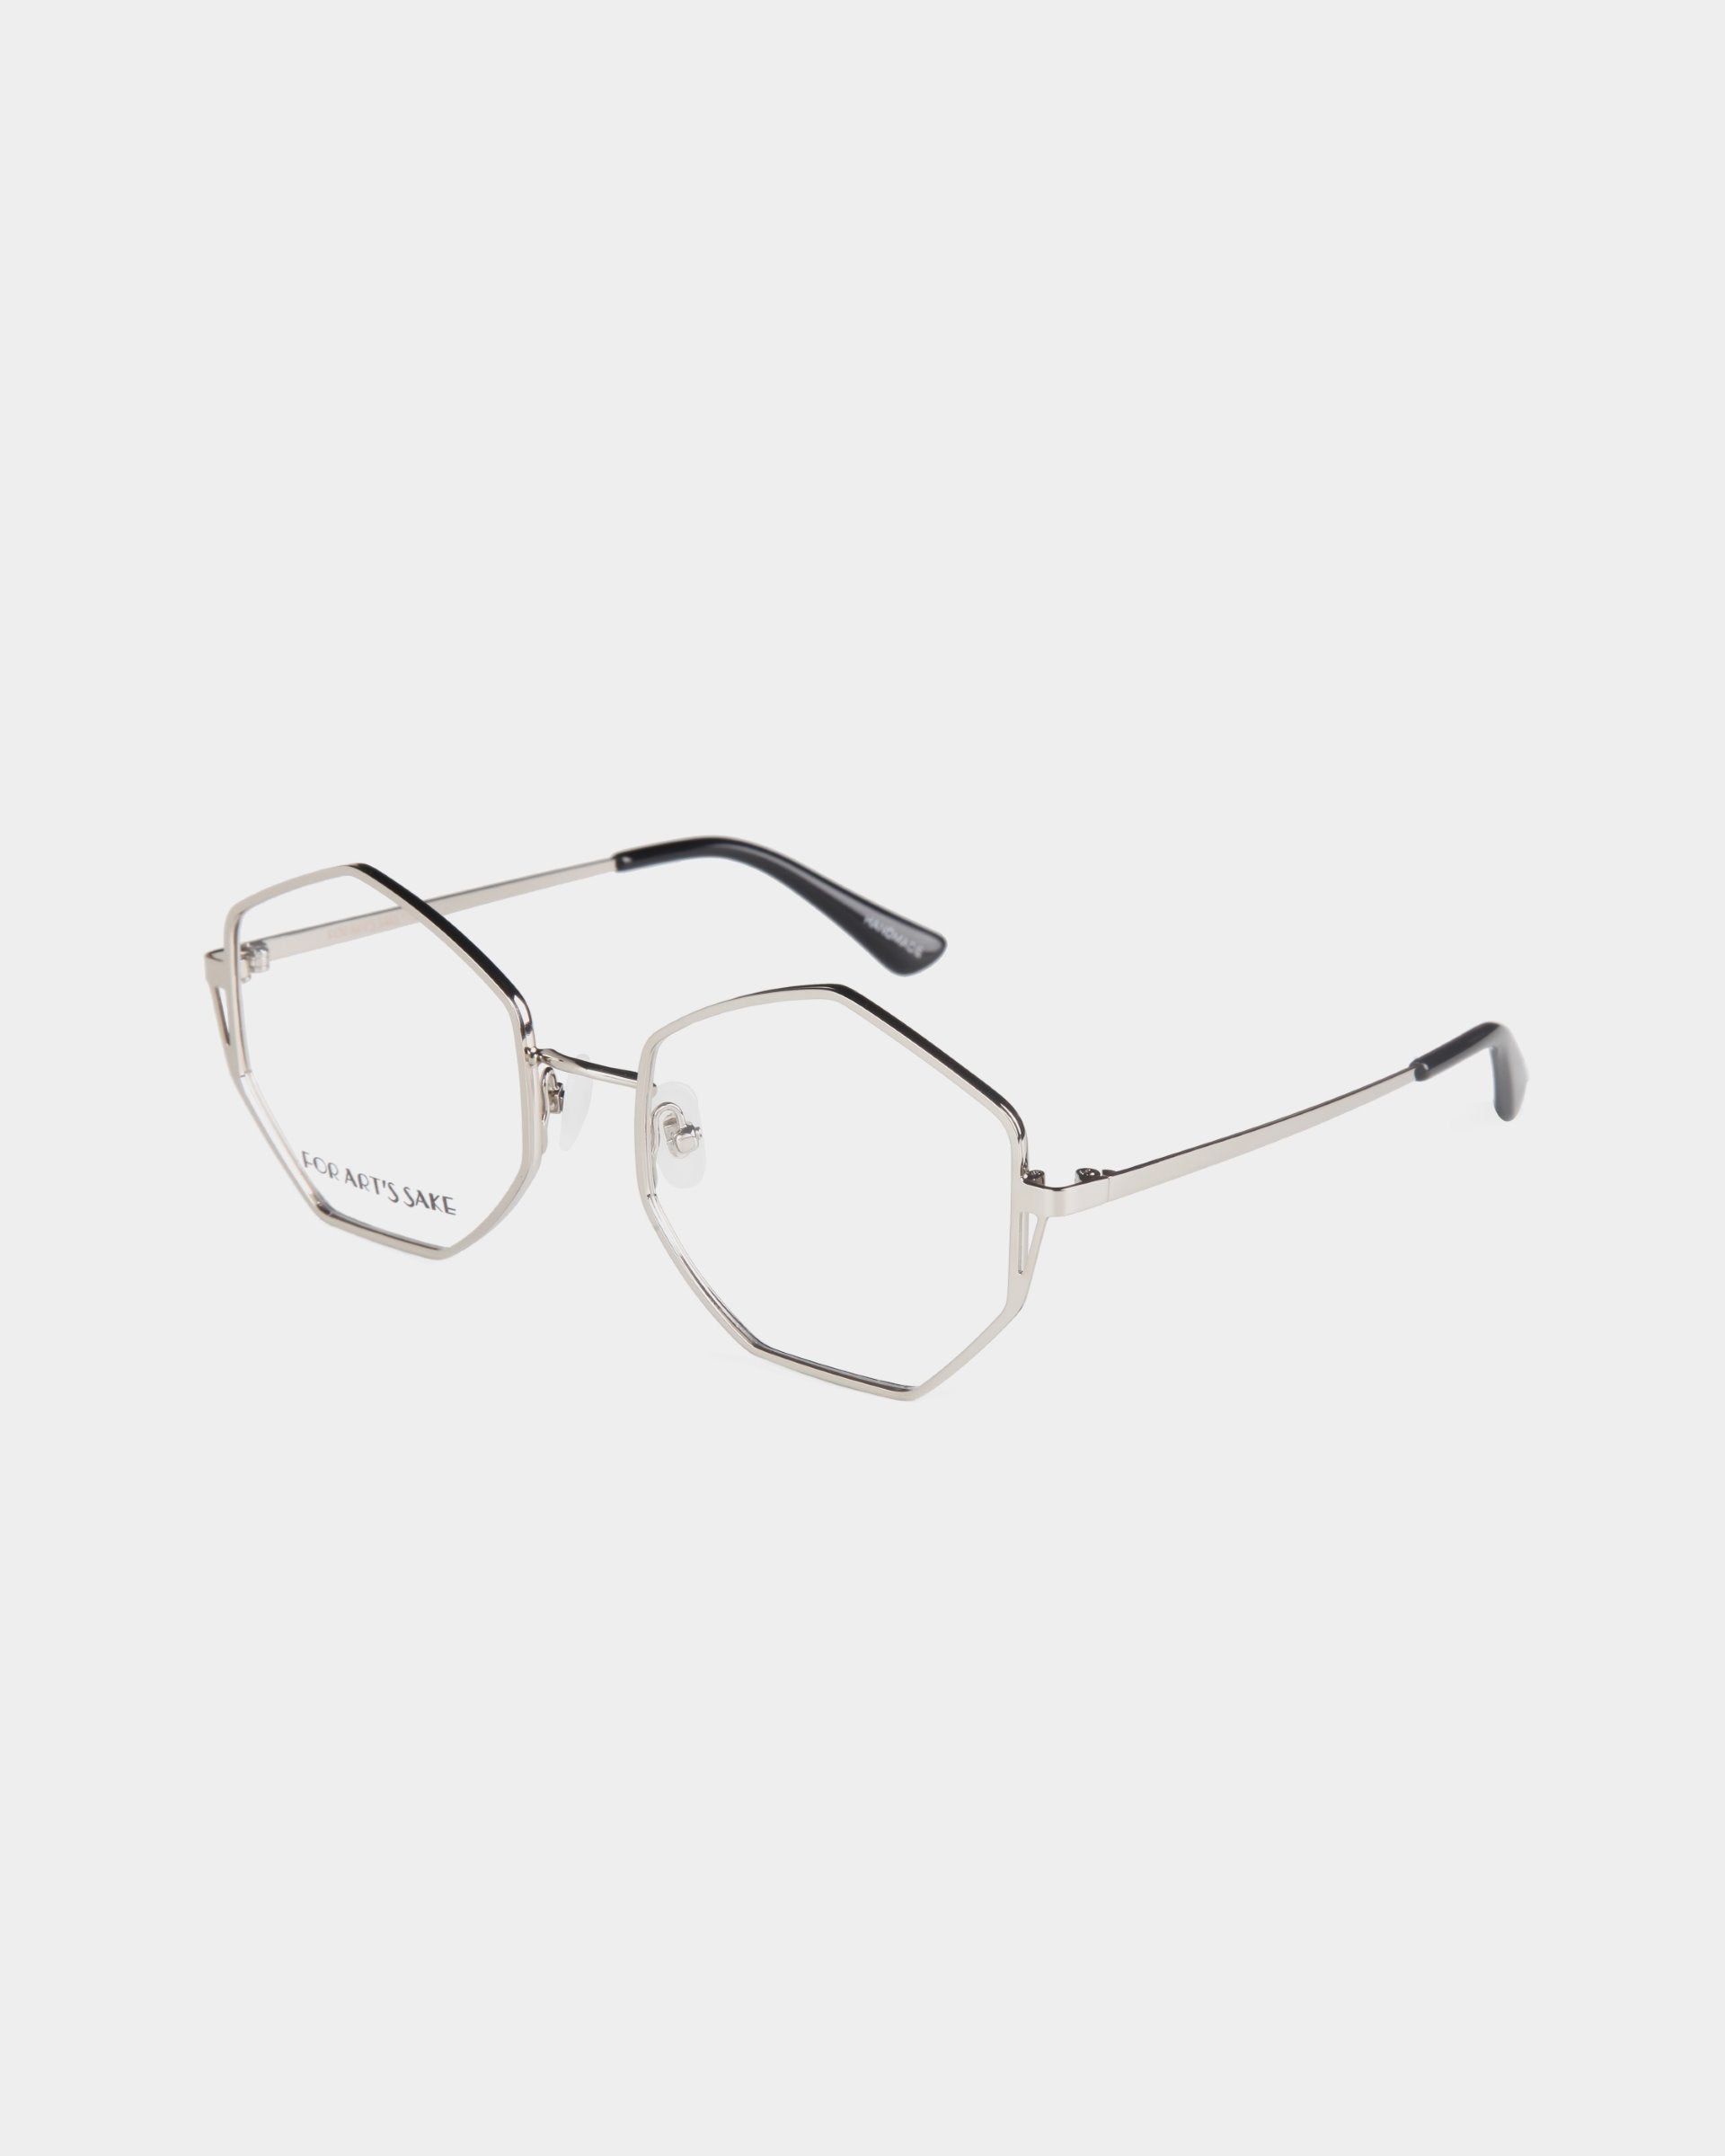 A pair of octagonal-shaped eyeglasses with thin silver metal frames and black tips on the arms. The lenses are clear and prescription-free, featuring a minimalist and modern design with adjustable jade nose pads. The words "For Art's Sake® Antidote" are visible on one of the lenses.